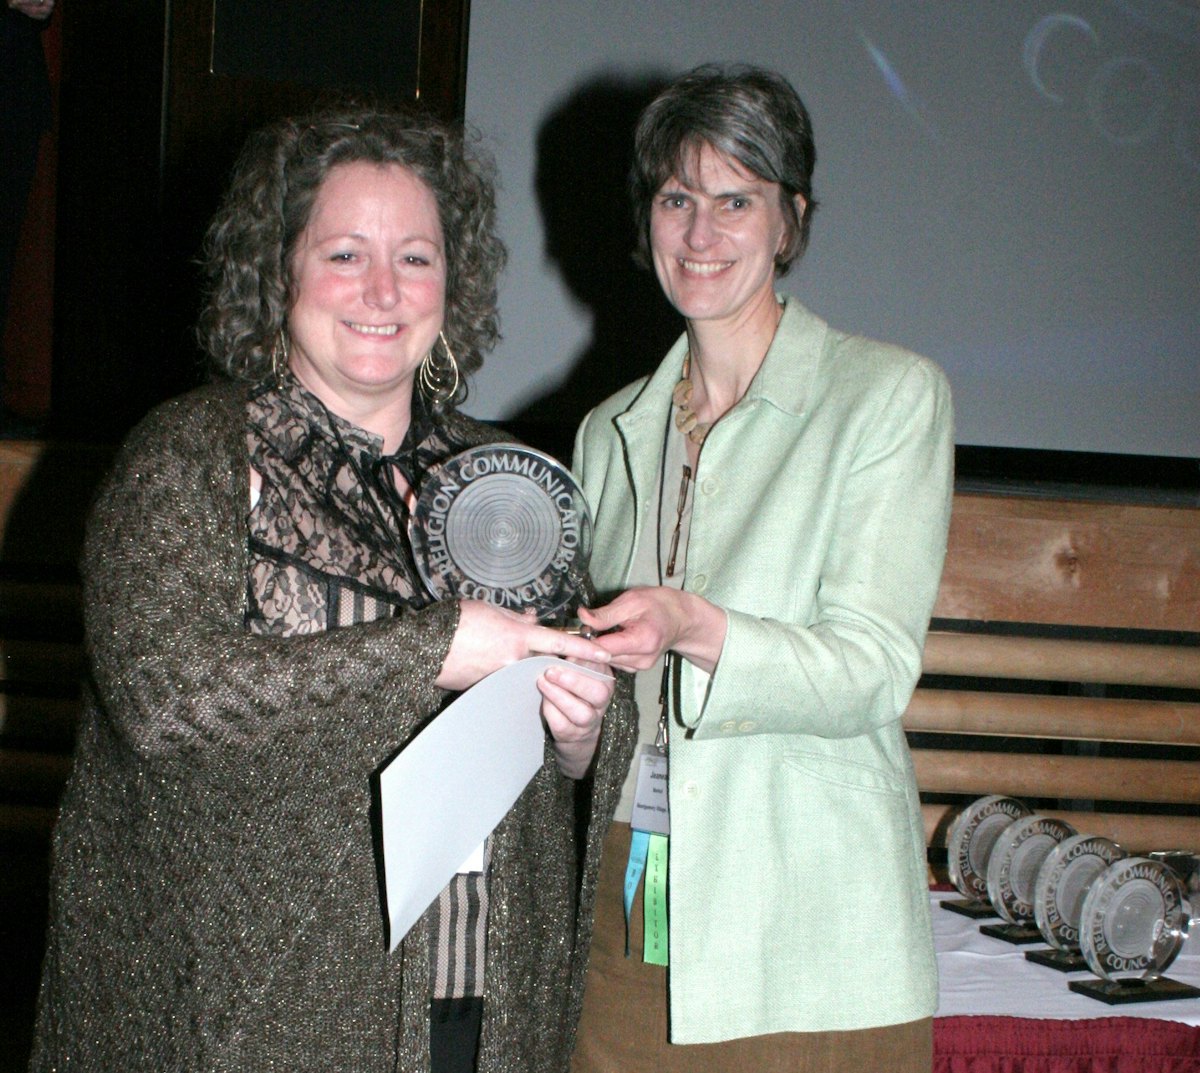 Patricia Tomarelli, shown at left, receiving a "Best of Class" DeRose-Hinkhouse Award for "Sarah Farmer's Dream of Peace" in the "public relations materials" category, for special issue publications. Presenting the award, at right, is Jeanean Merkel, President of the Religion Communicators Council (RCC).